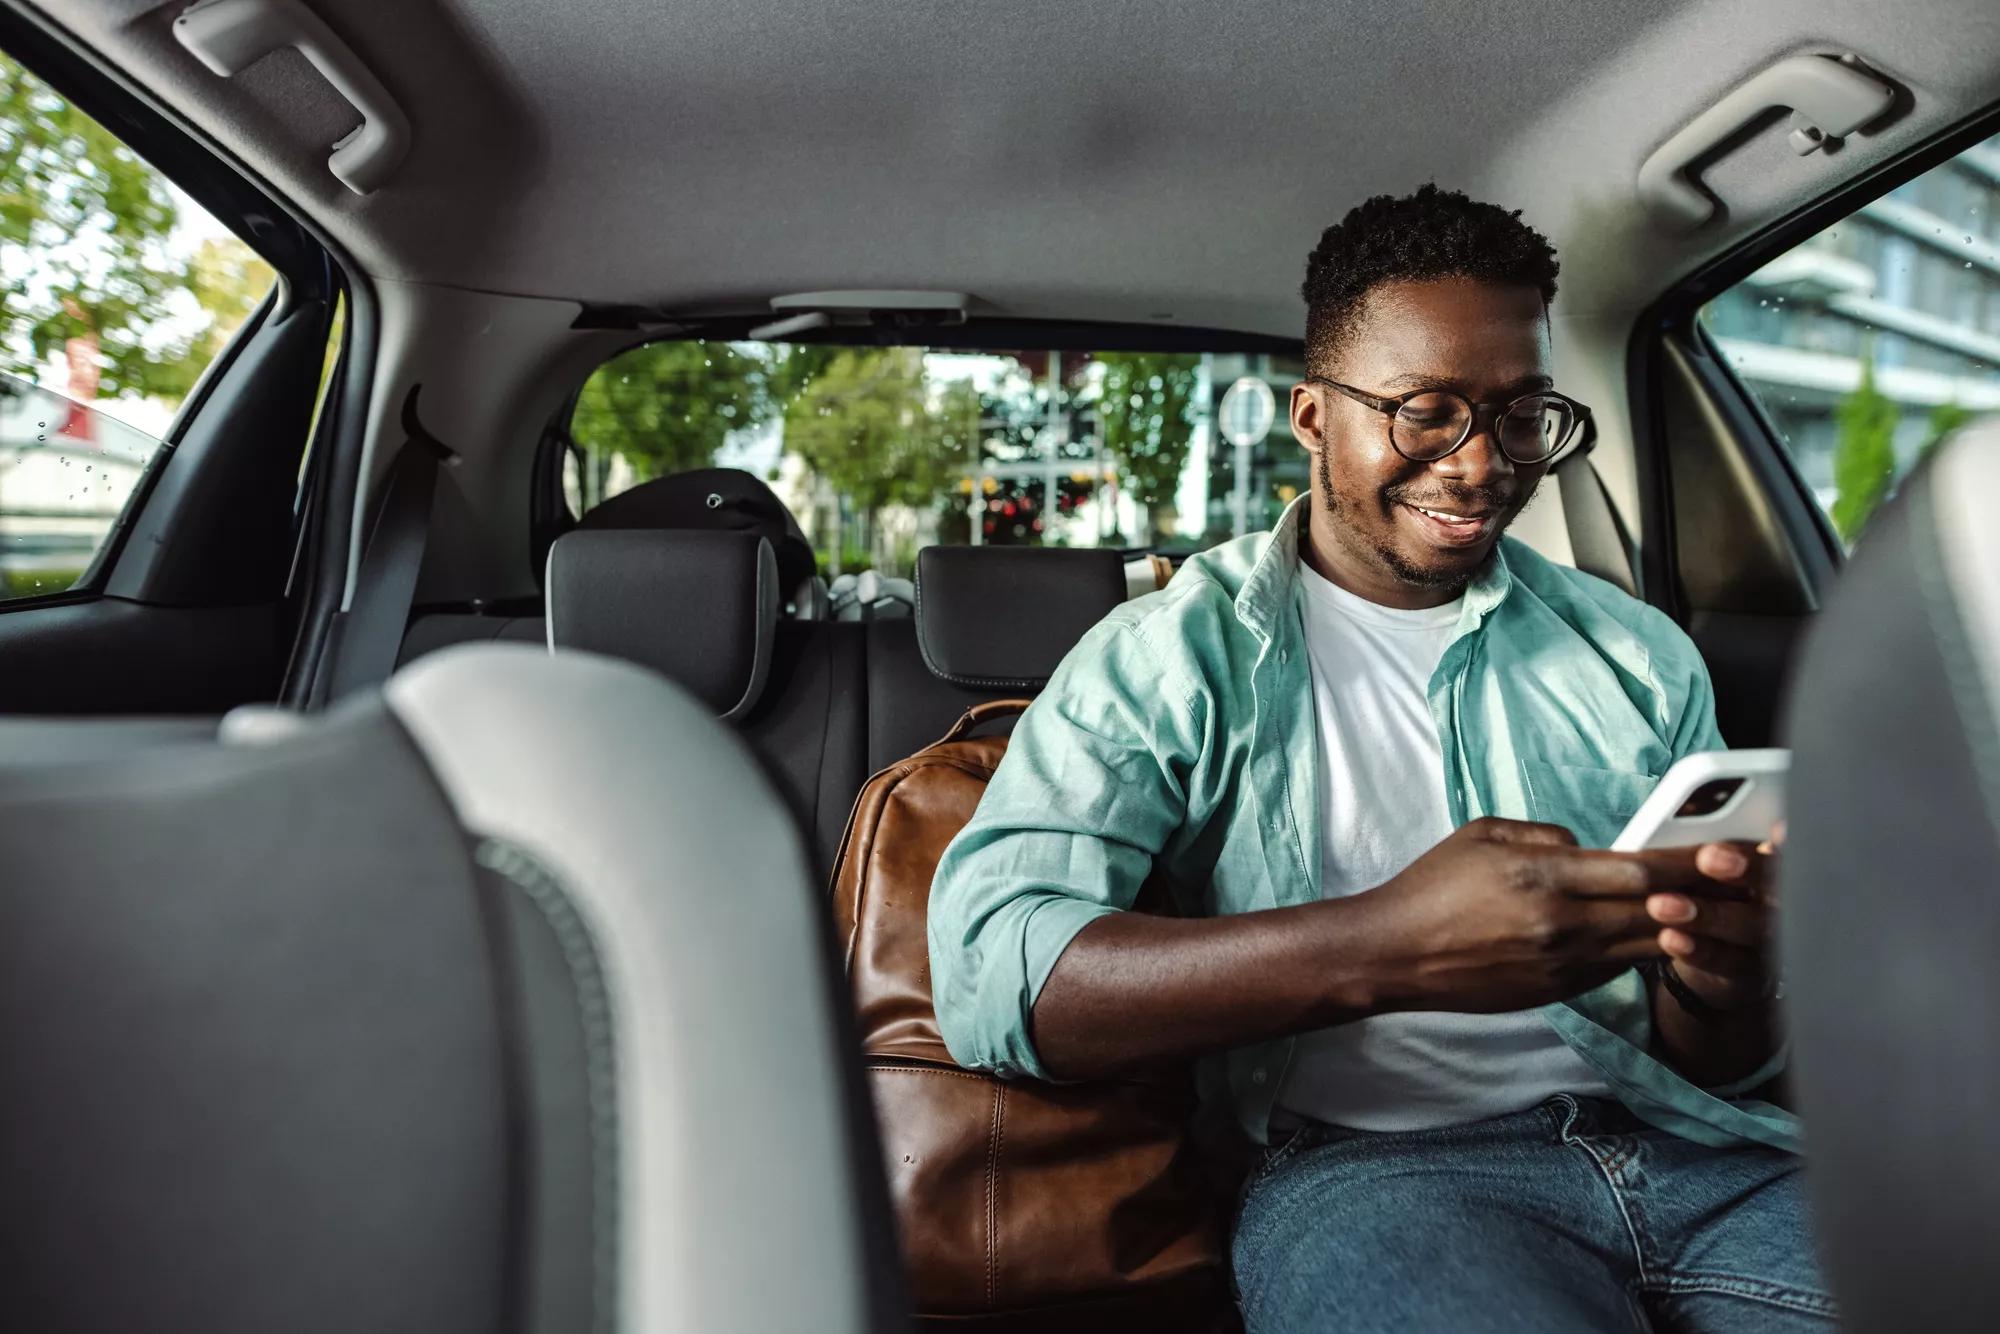 African-American male commuterusing a mobile phone in taxi